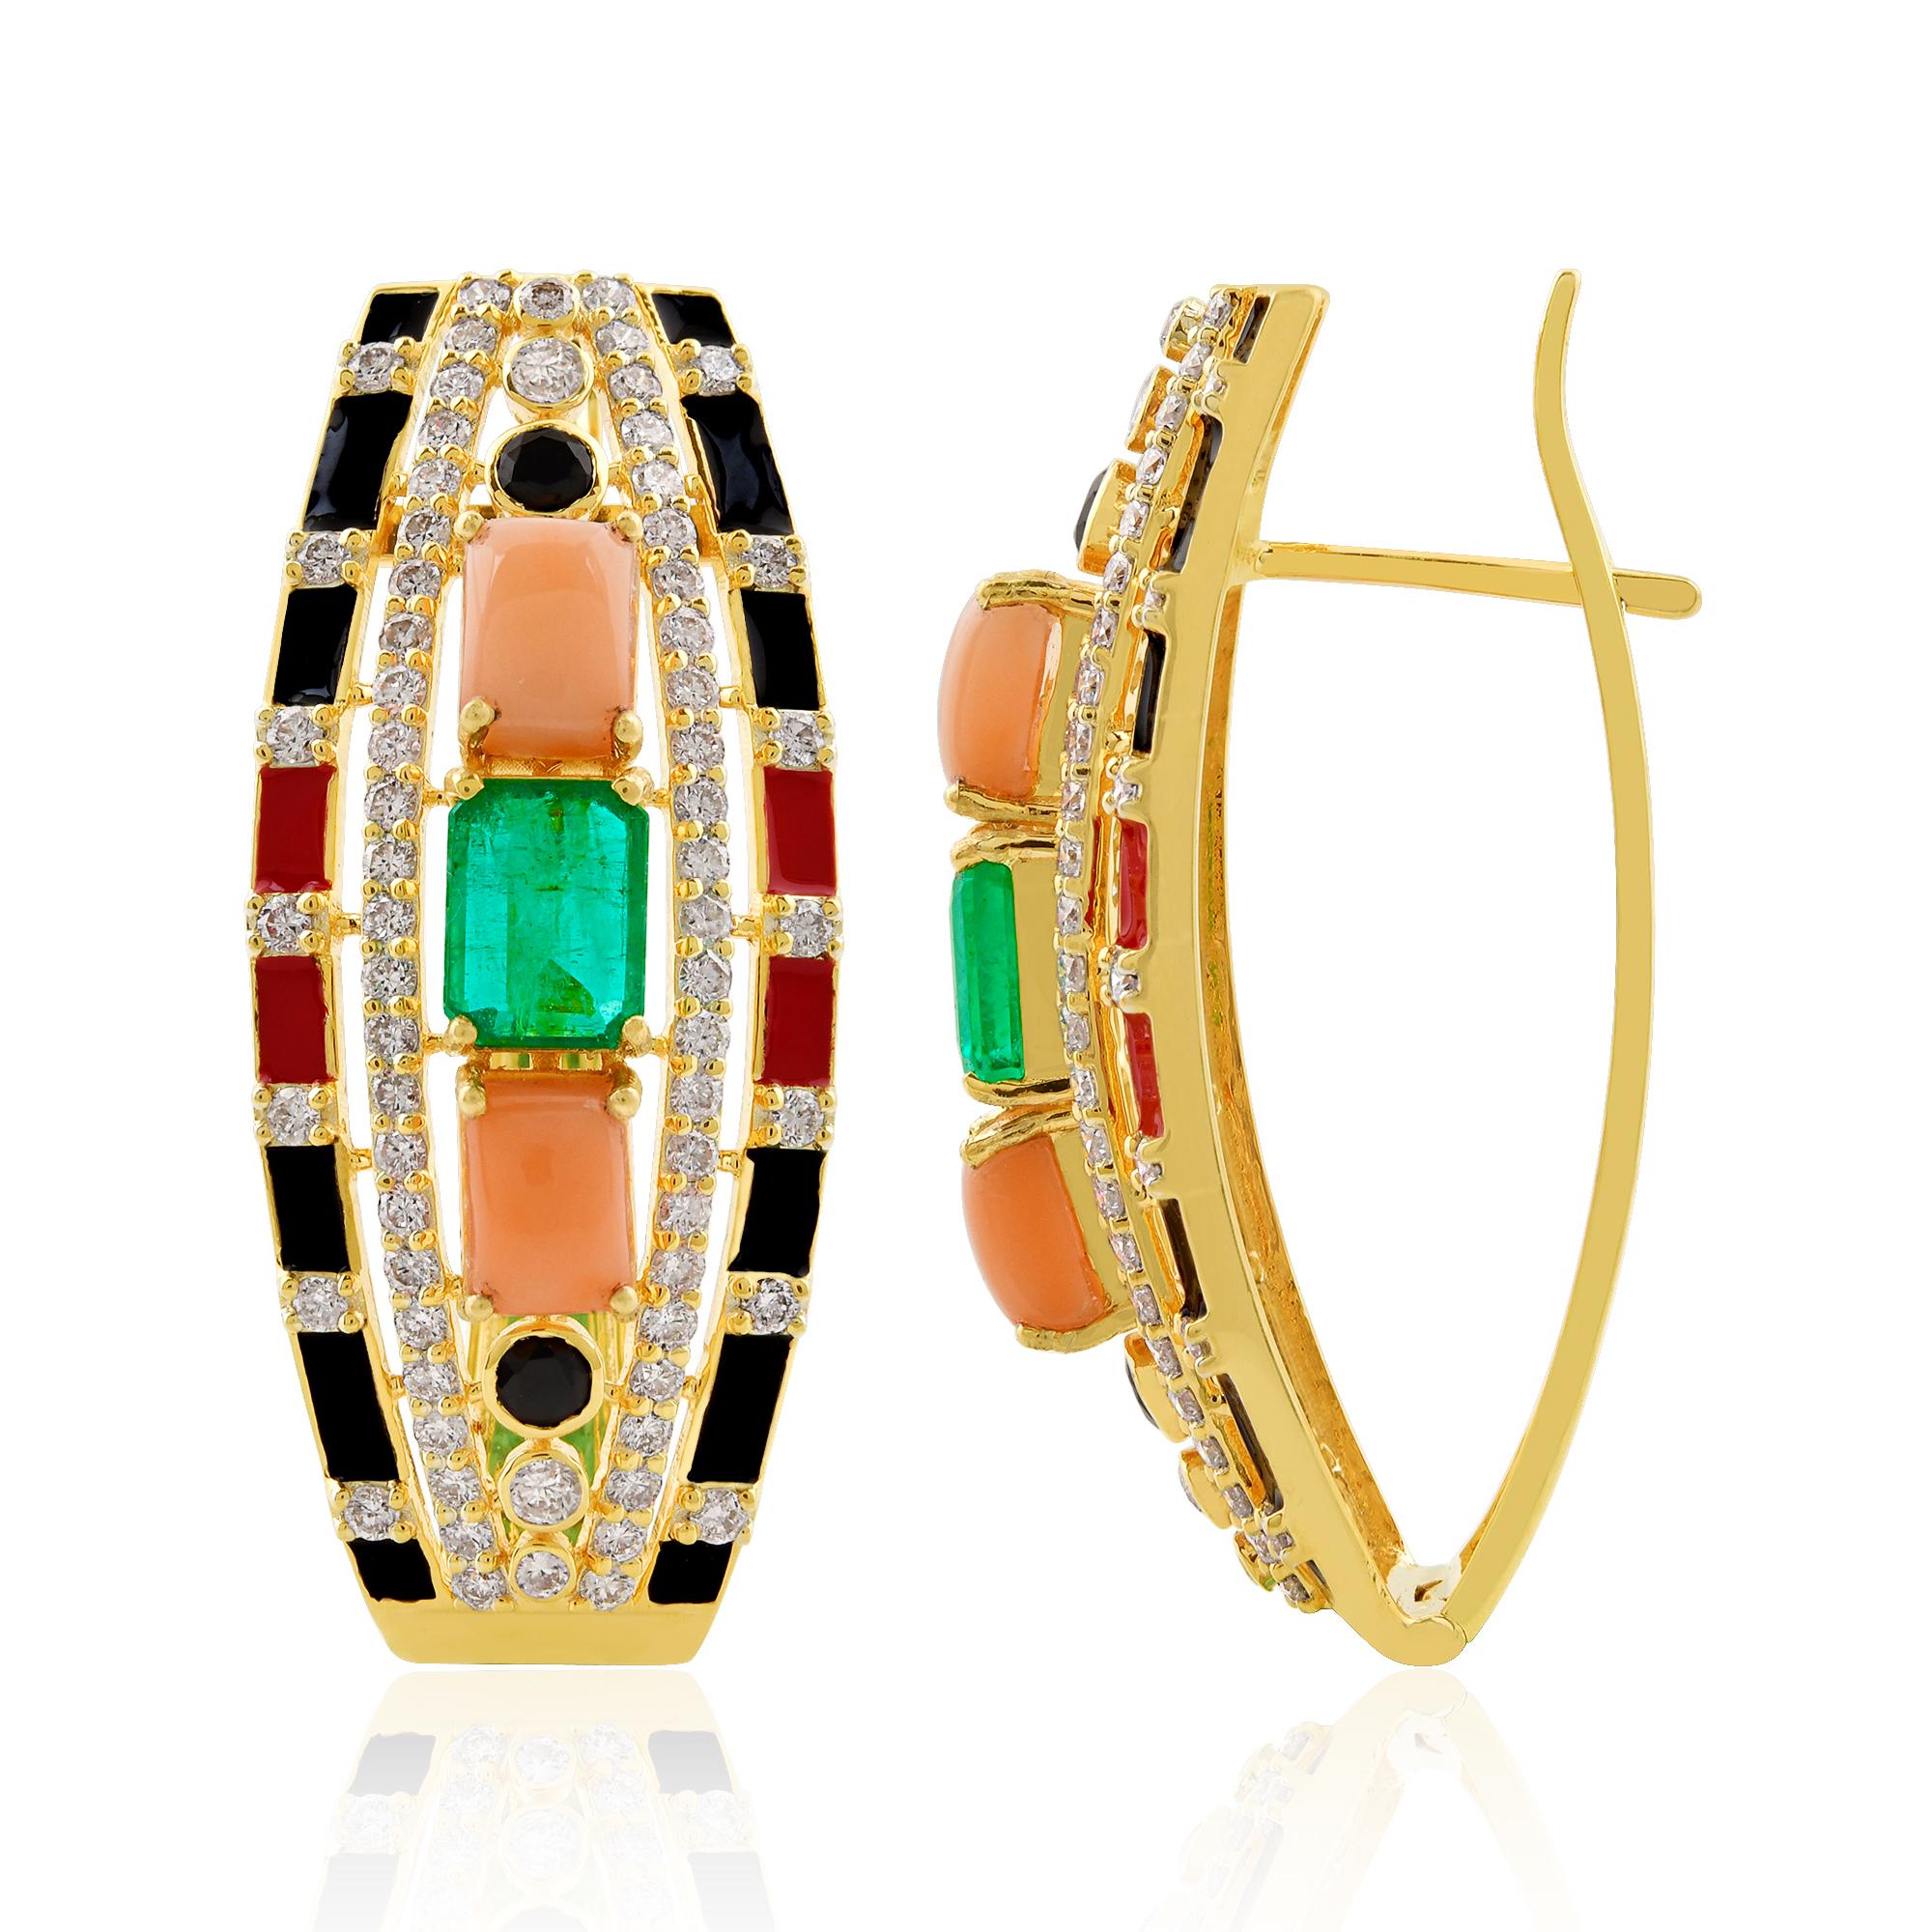 Item Code :- SEE-11743
Gross Wt :- 14.26 gm
18k Solid Yellow Gold Wt :- 12.95 gm
Natural Diamond Wt :- 1.85 ct.  ( AVERAGE DIAMOND CLARITY SI1-SI2 & COLOR H-I )
Coral & Emerald Wt :- 4.69 ct.
Earrings Size :- 36 mm approx.

✦